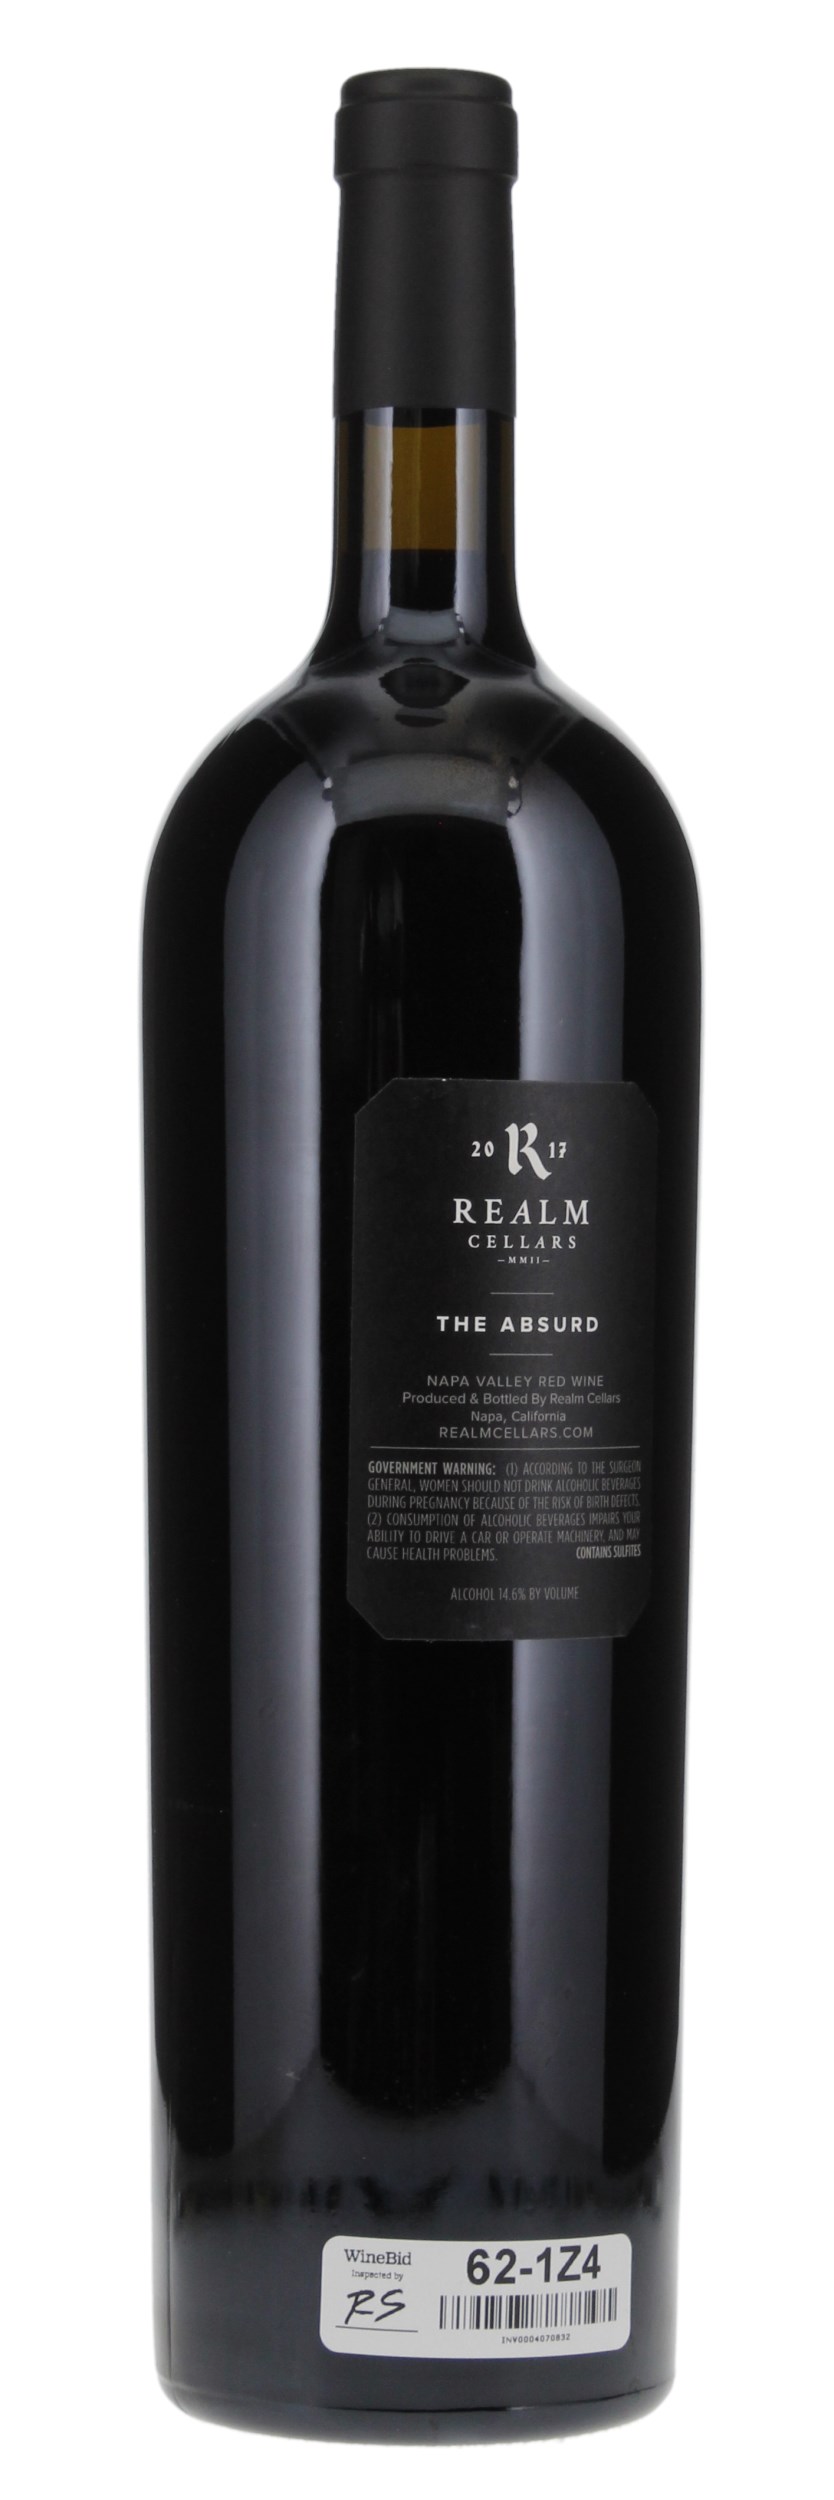 2017 Realm The Absurd, 1.5ltr